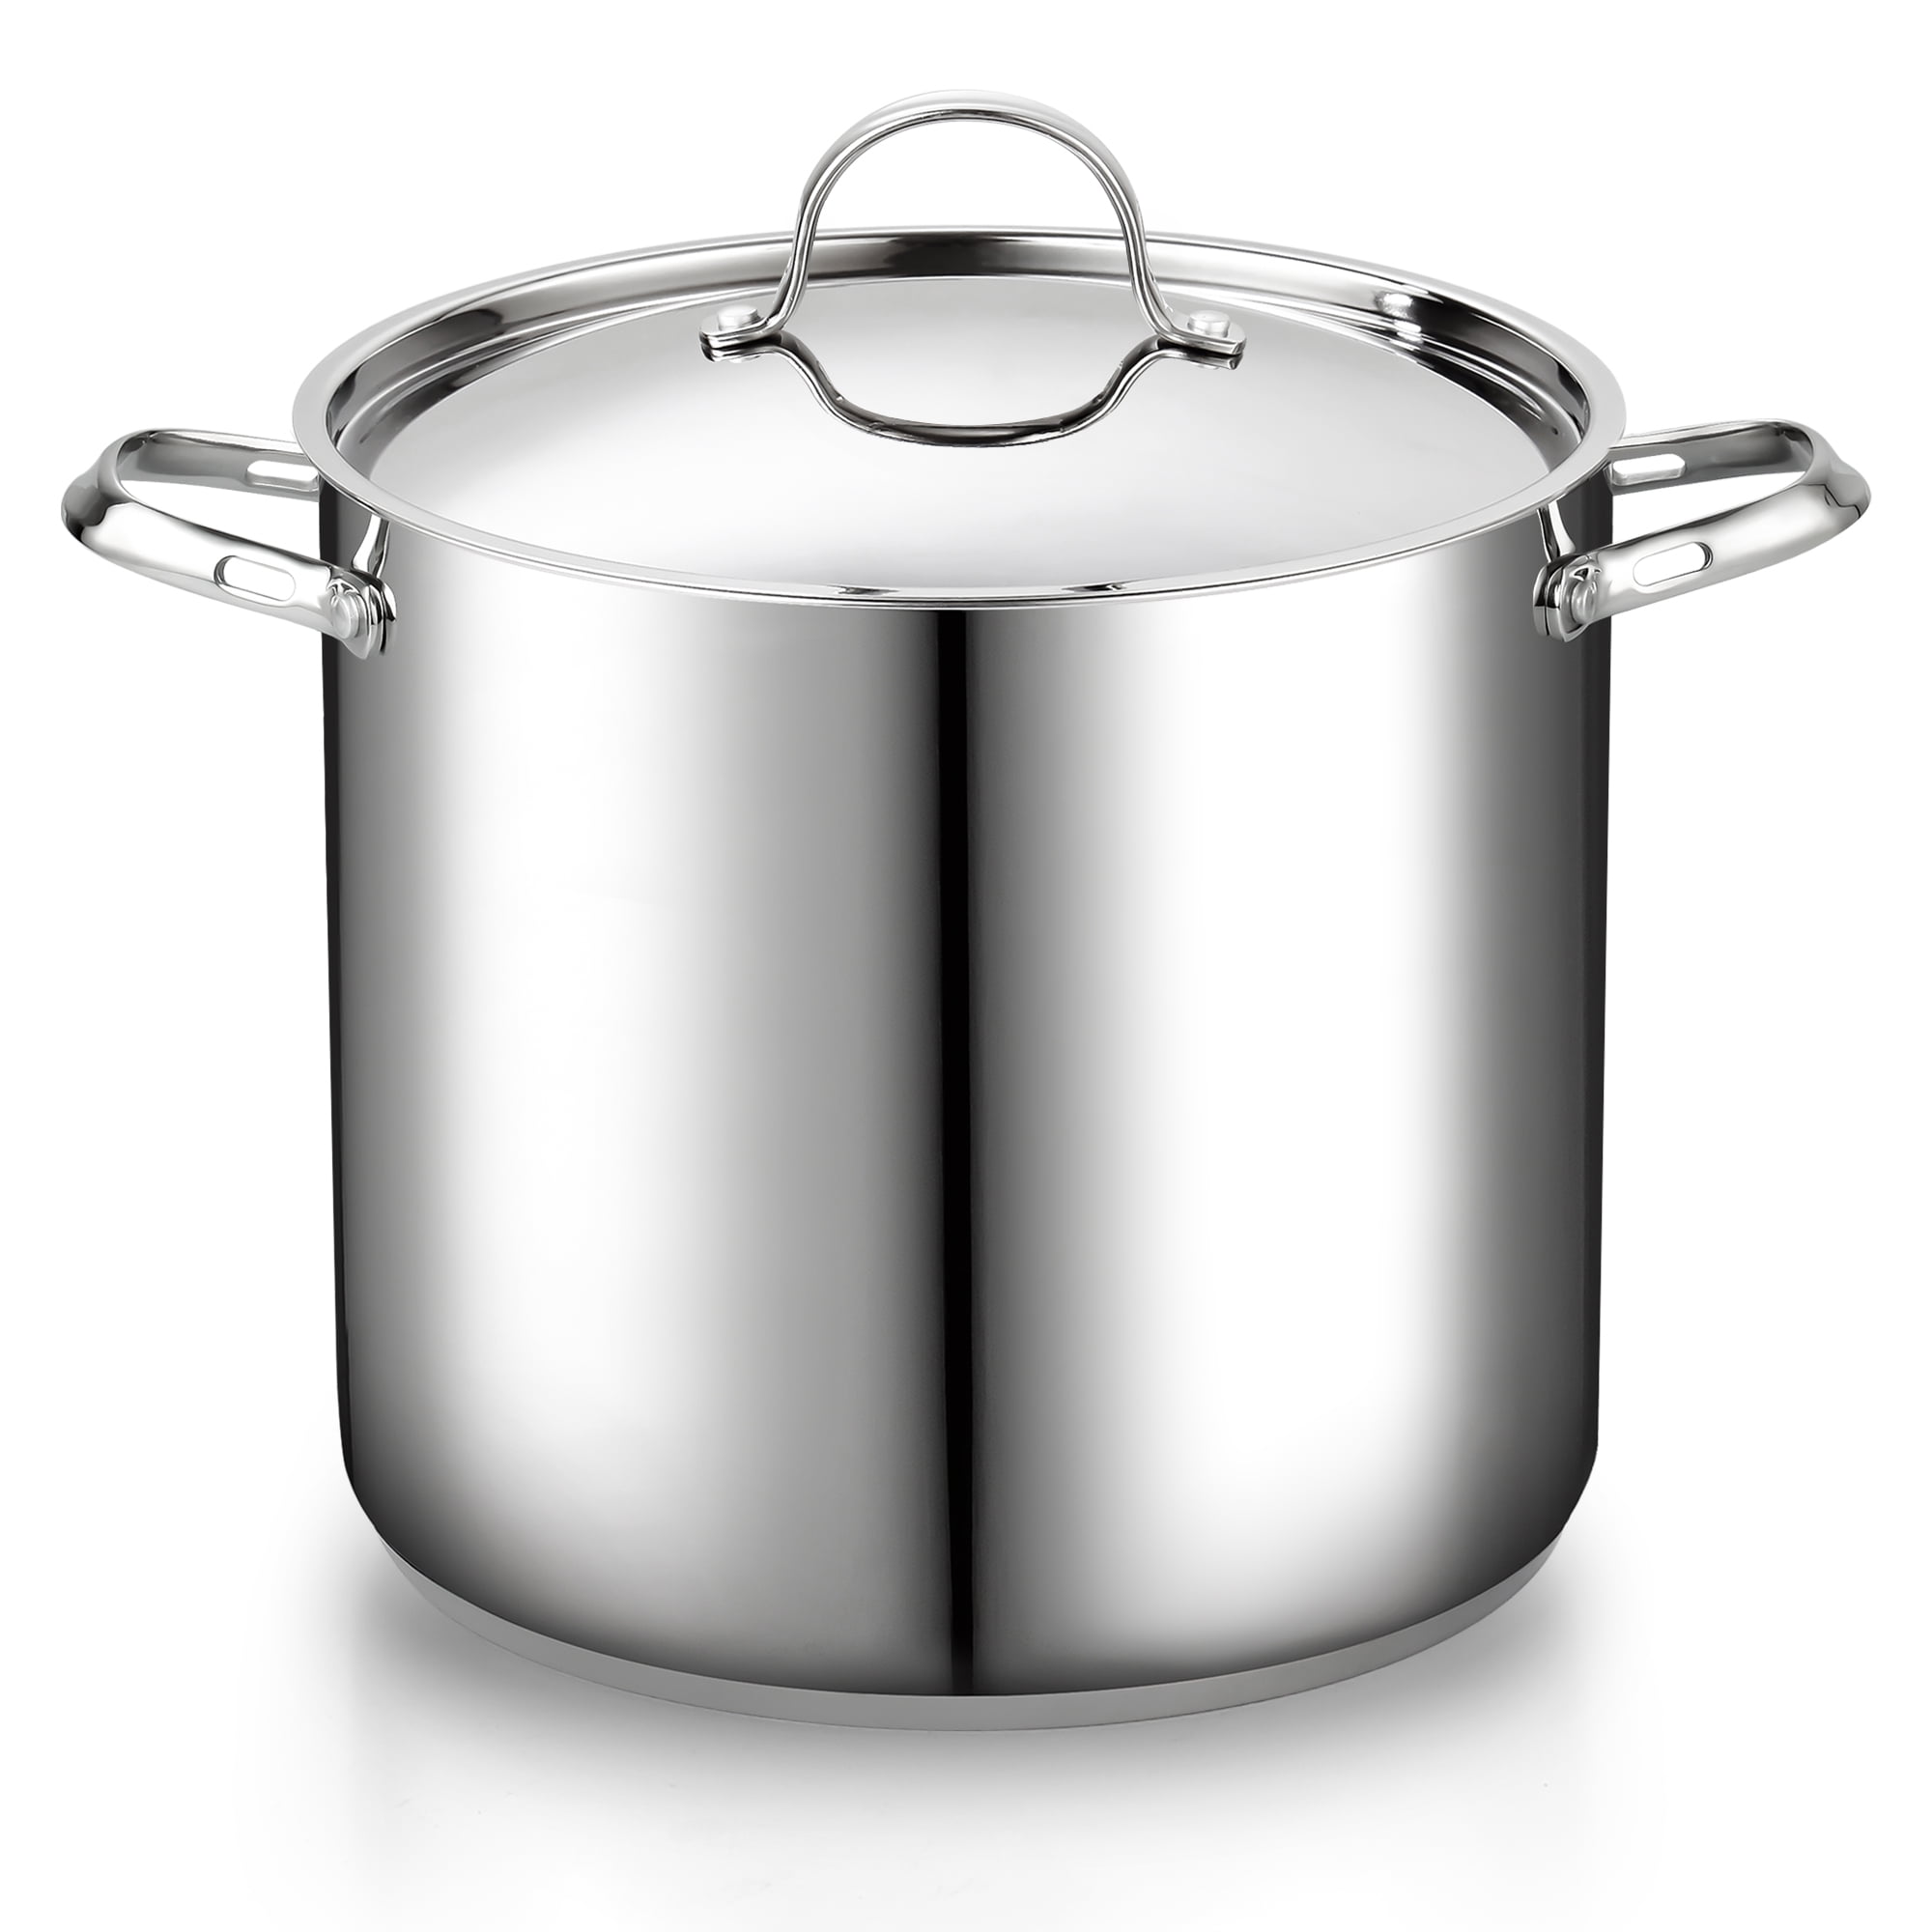 CURTA 12 Quart Large Stock Pot with Lid, NSF Listed, 3-Ply 18/8 Stainless  Steel Cooking Pot, Commercial Cookware for Soup, Stew & Sauce, Riveted